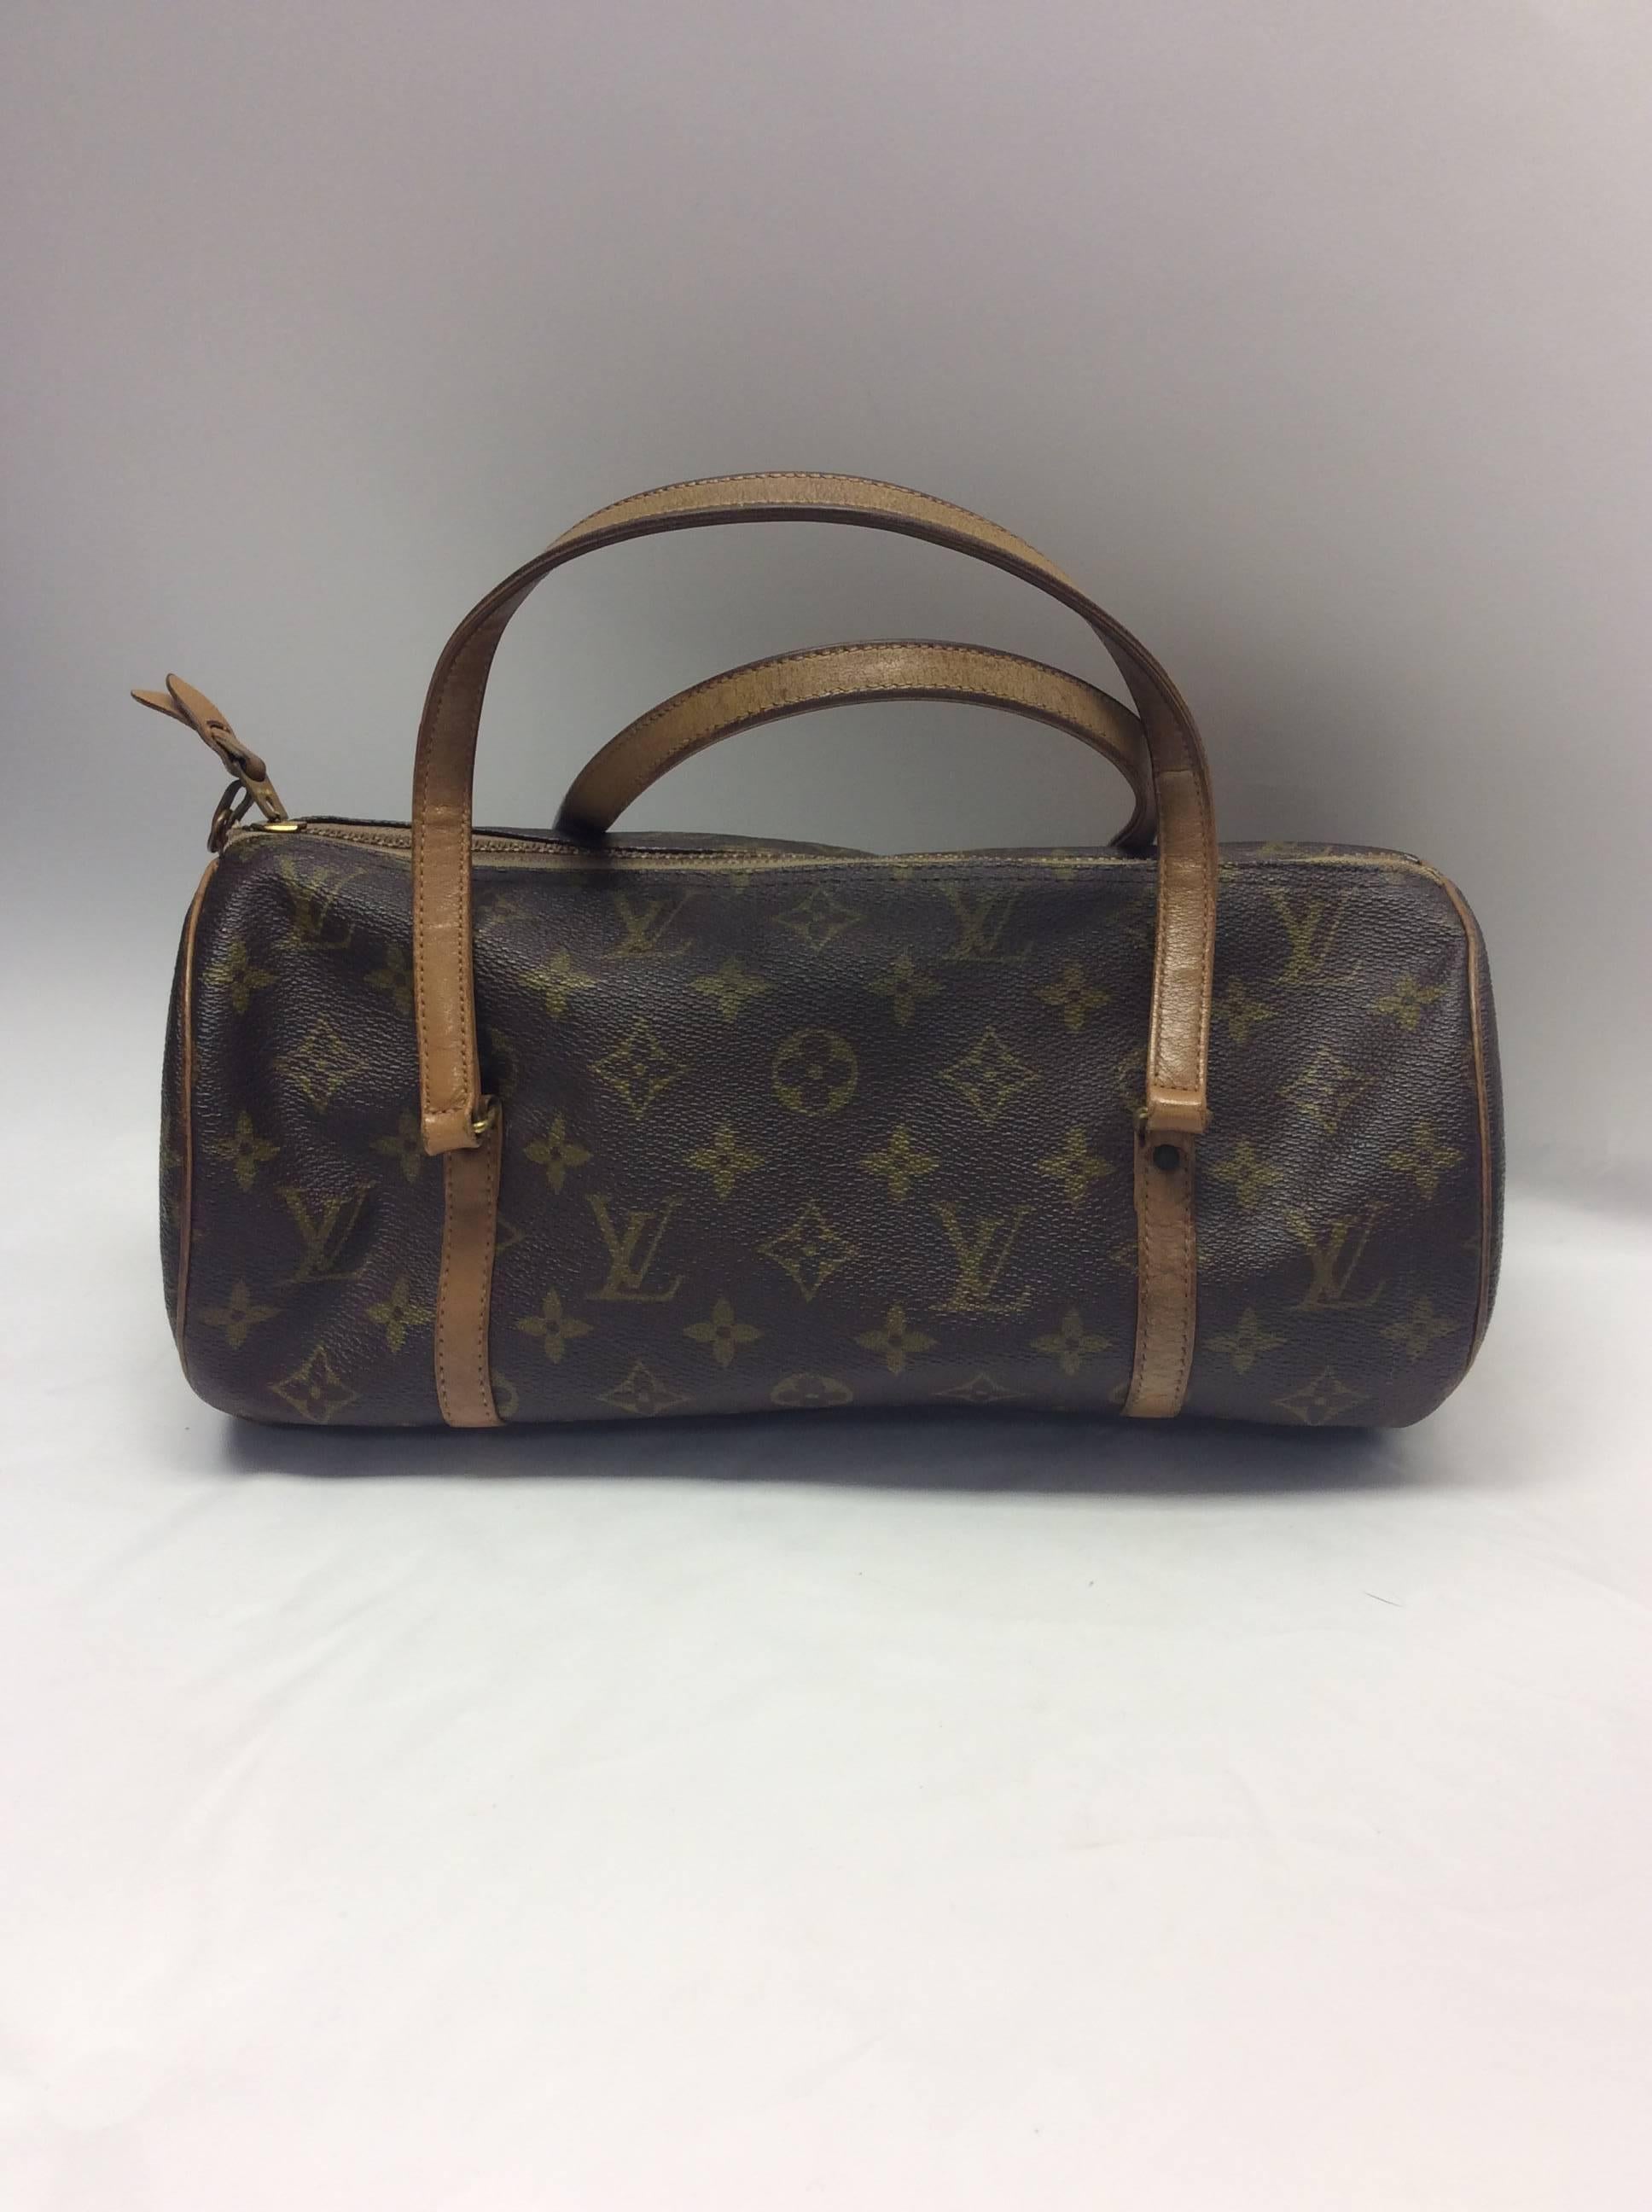 Louis Vuitton Papillon Monogram Shoulder Bag In Good Condition For Sale In Narberth, PA